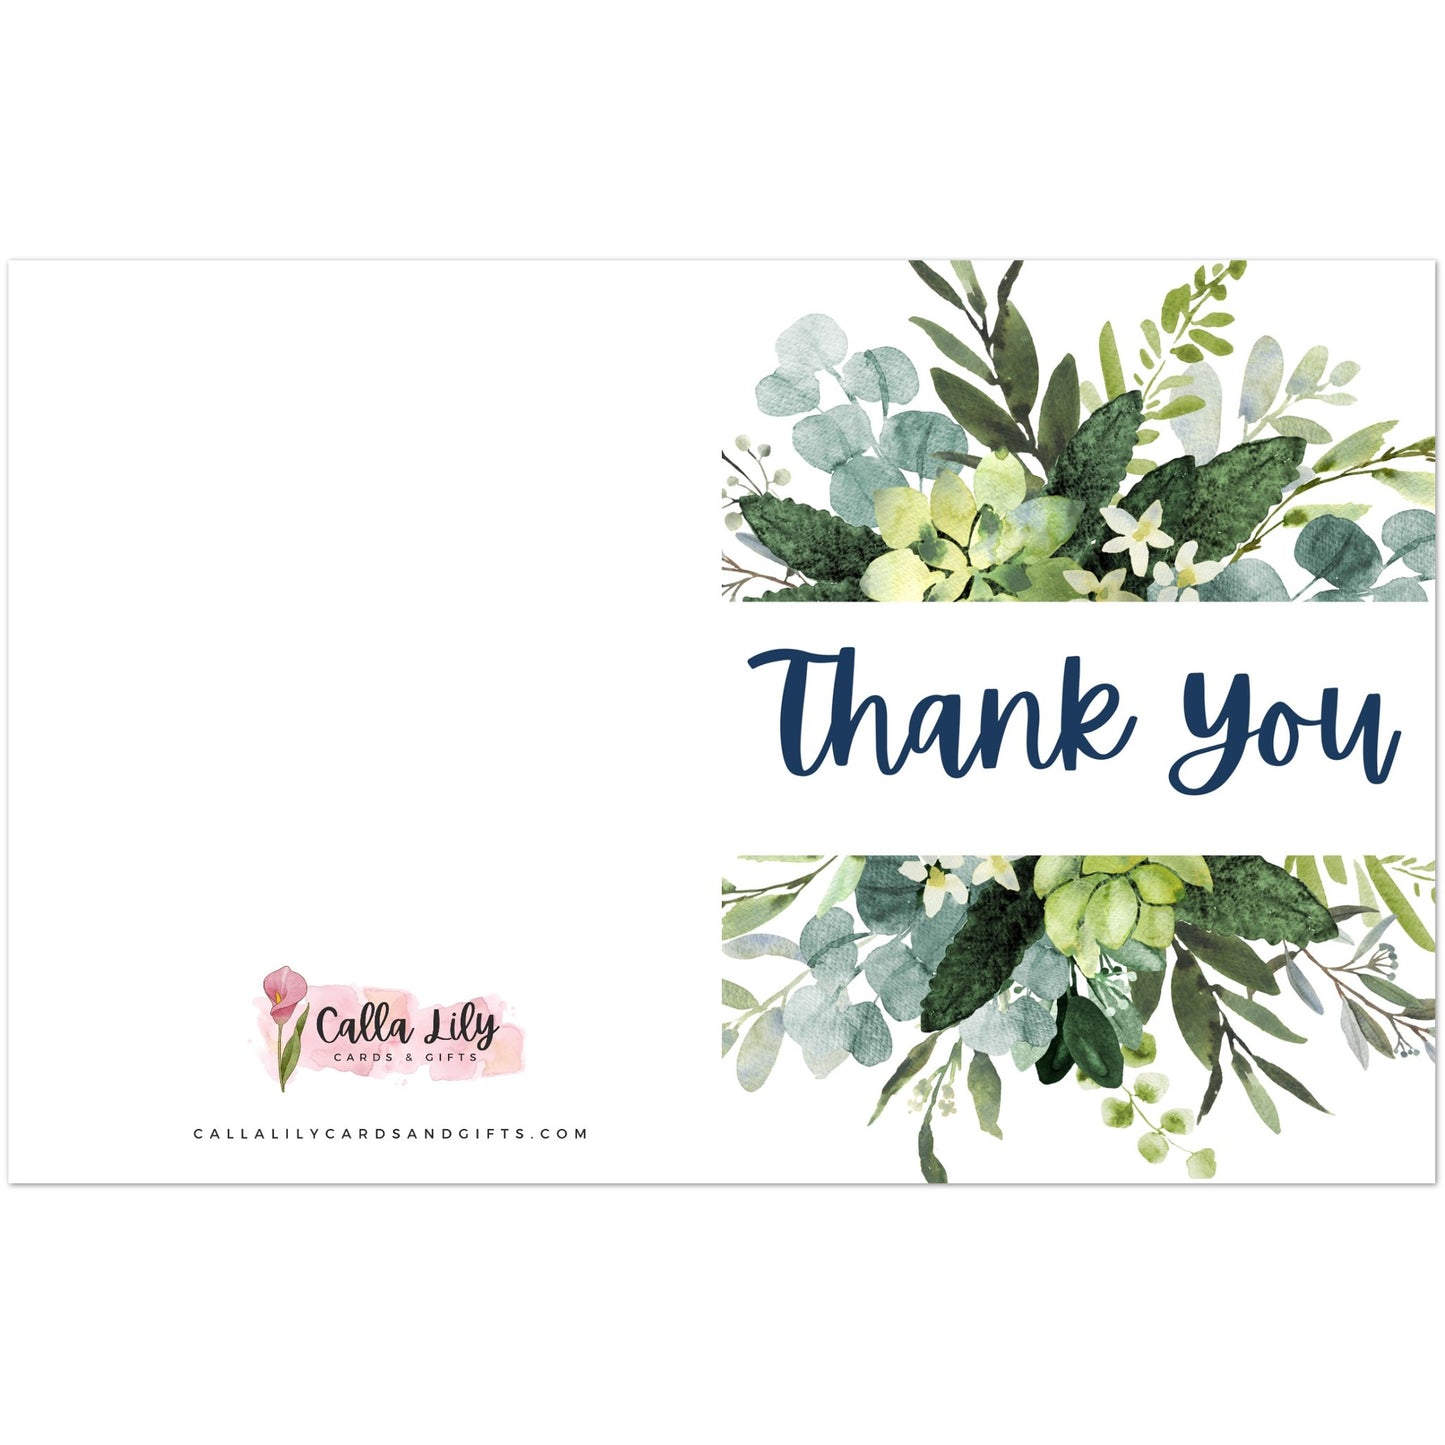 Thank you- Pack of 10